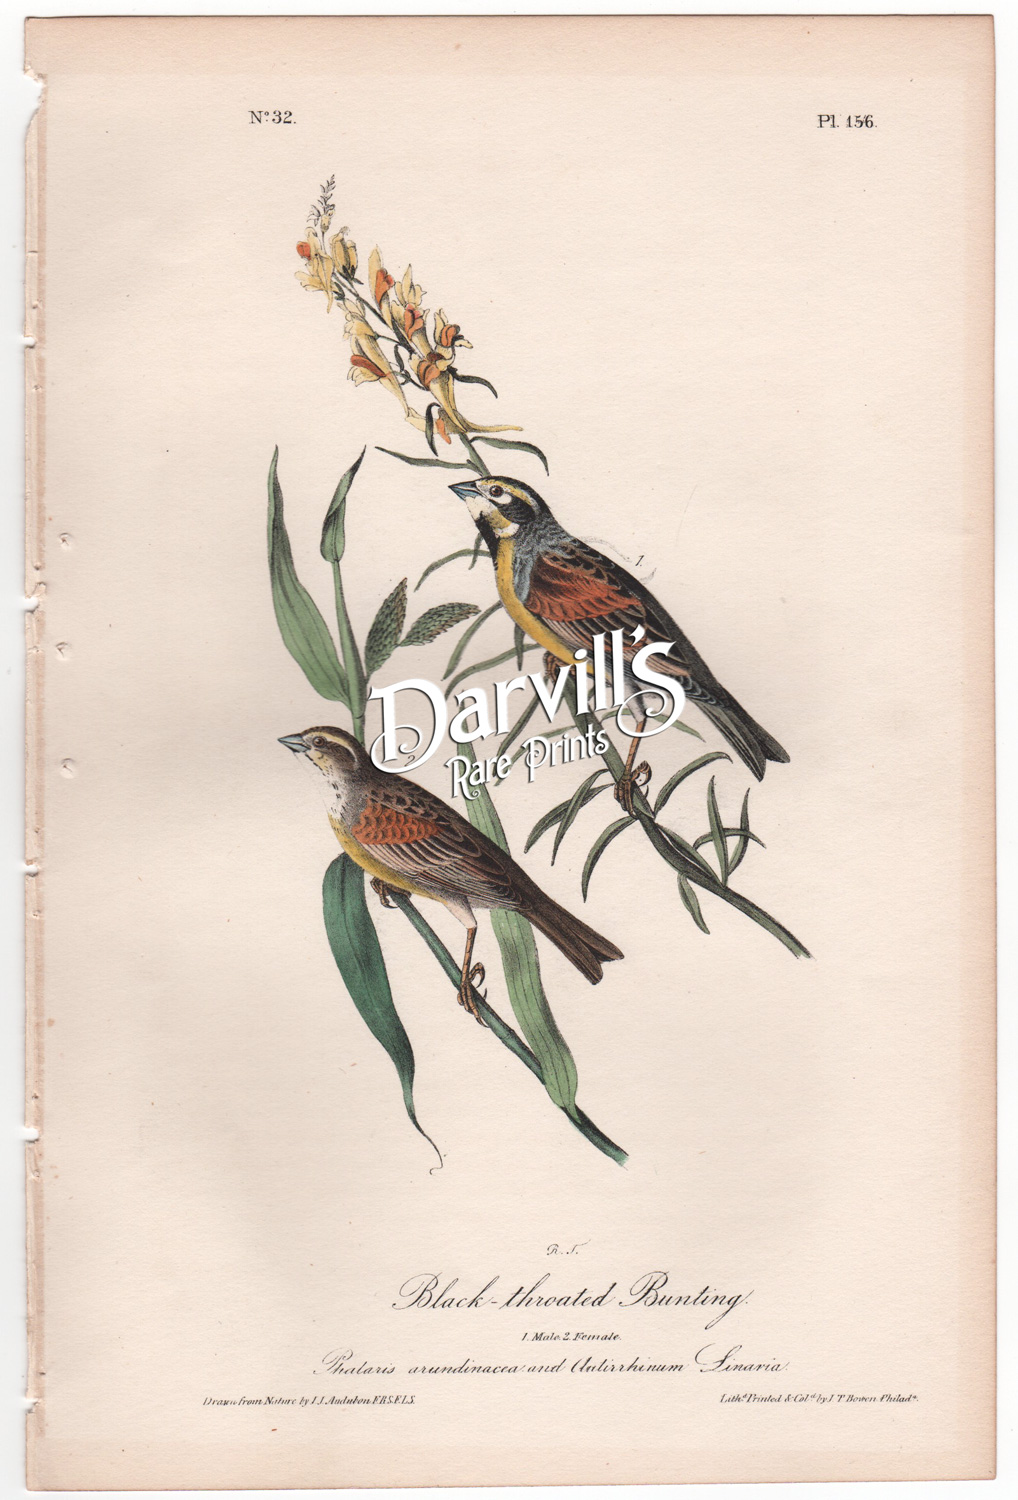 Audubon first edition Black-throated Bunting plate 156